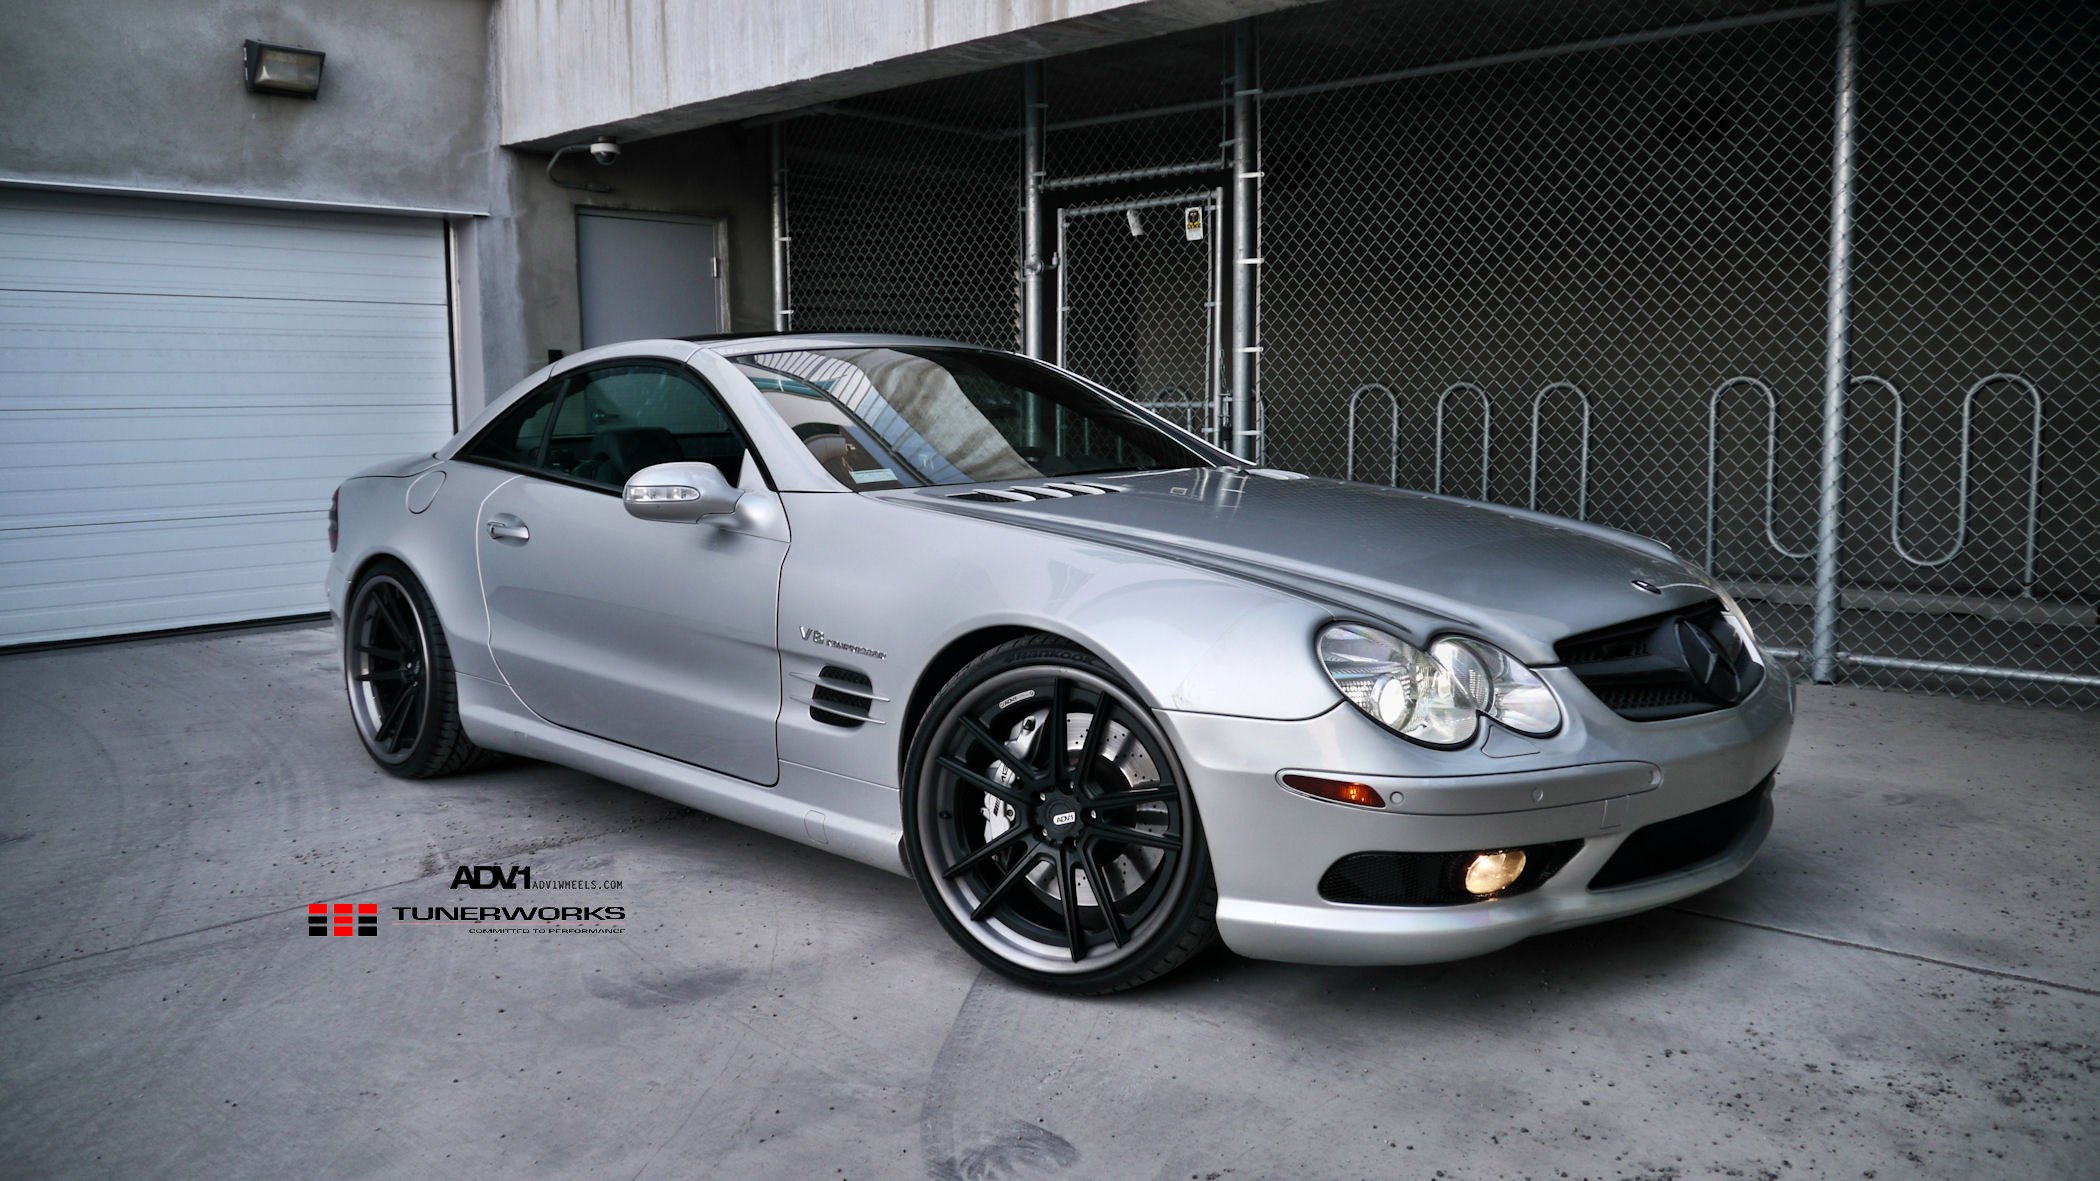 Silver Mercedes SL Class with Blacked Out Grille  - Photo by ADV.1